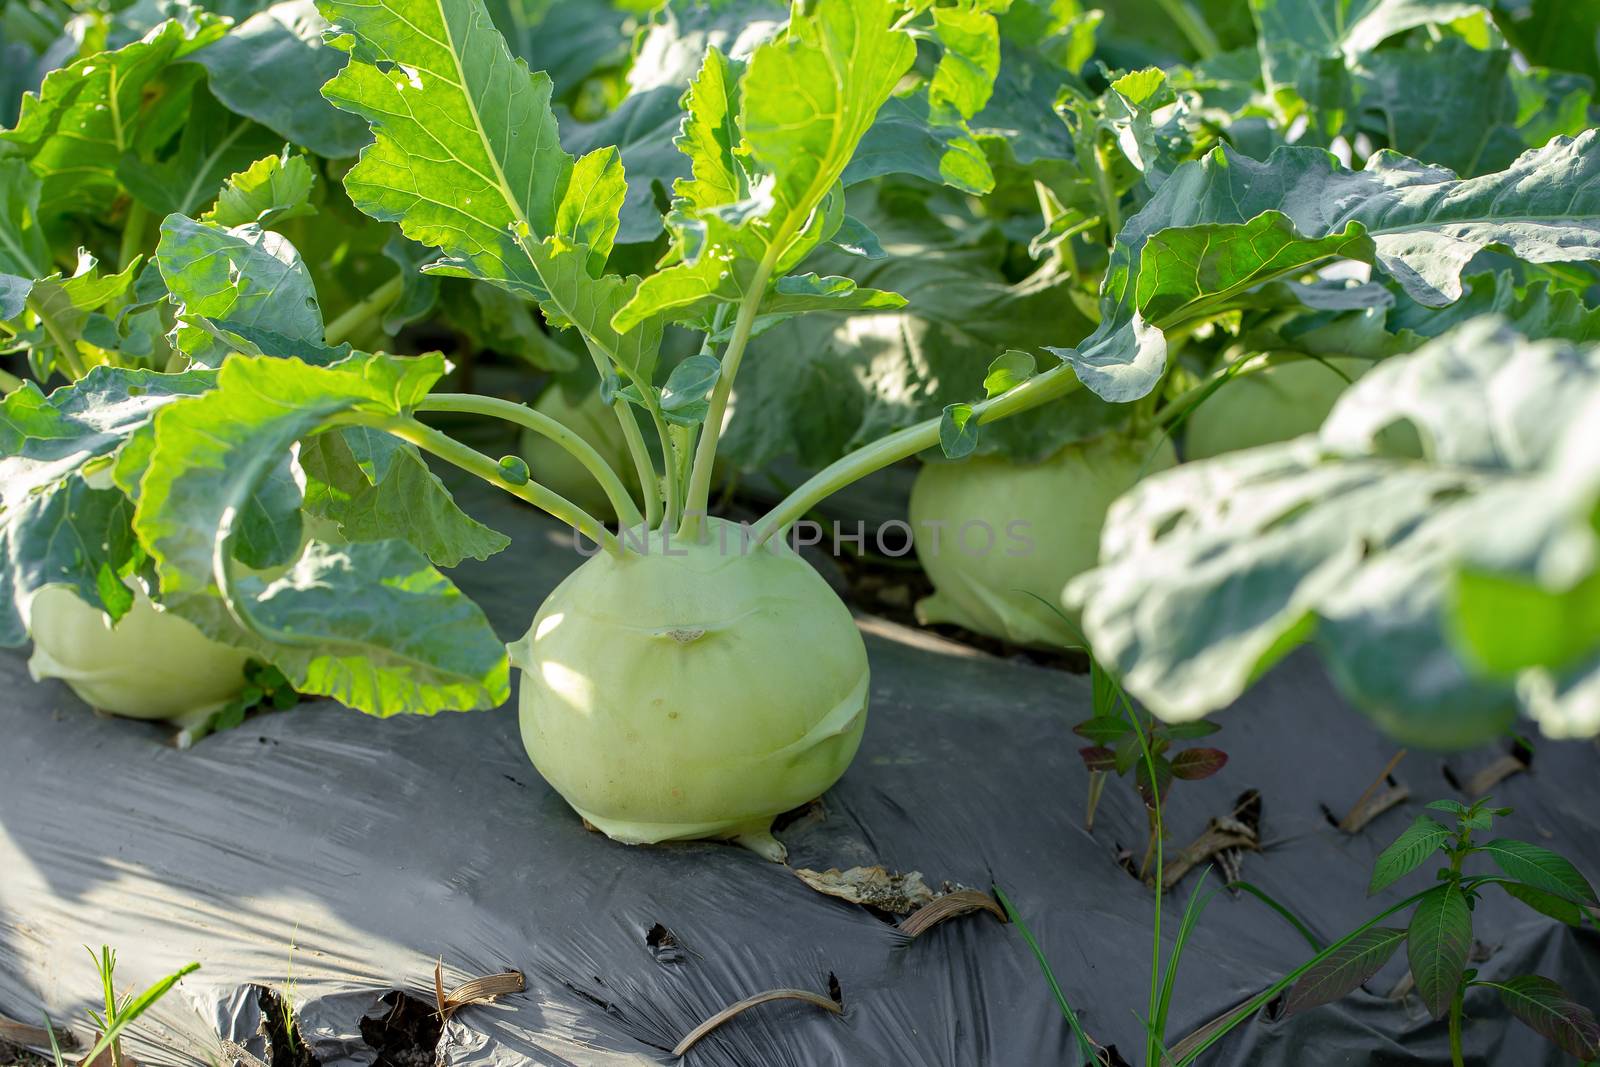 Kohlrabi cabbage or turnip plant growing in in the garden.